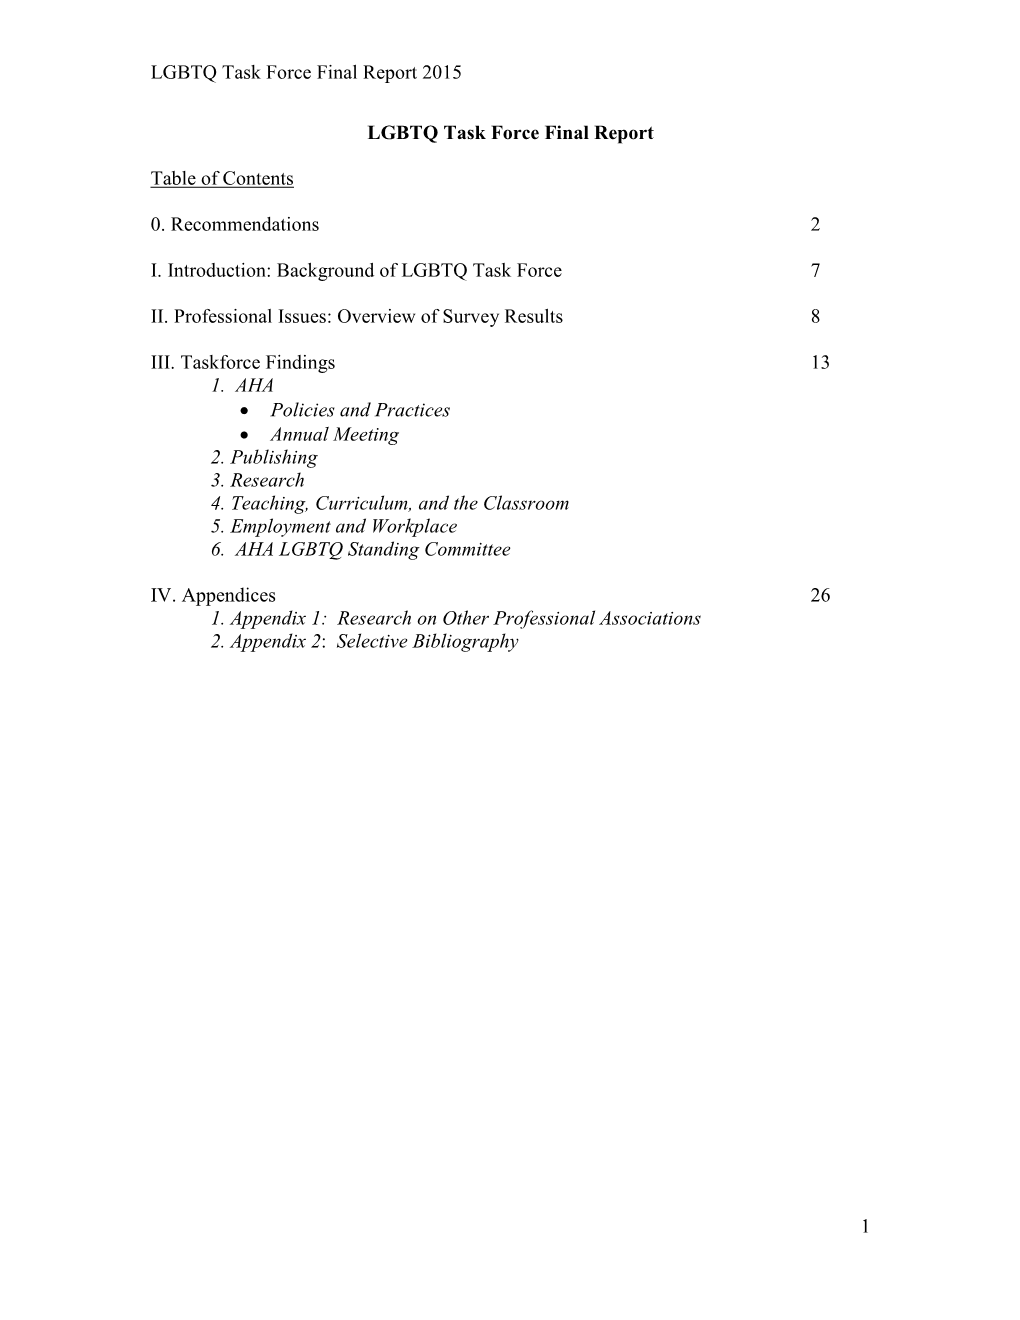 Background of LGBTQ Task Force 7